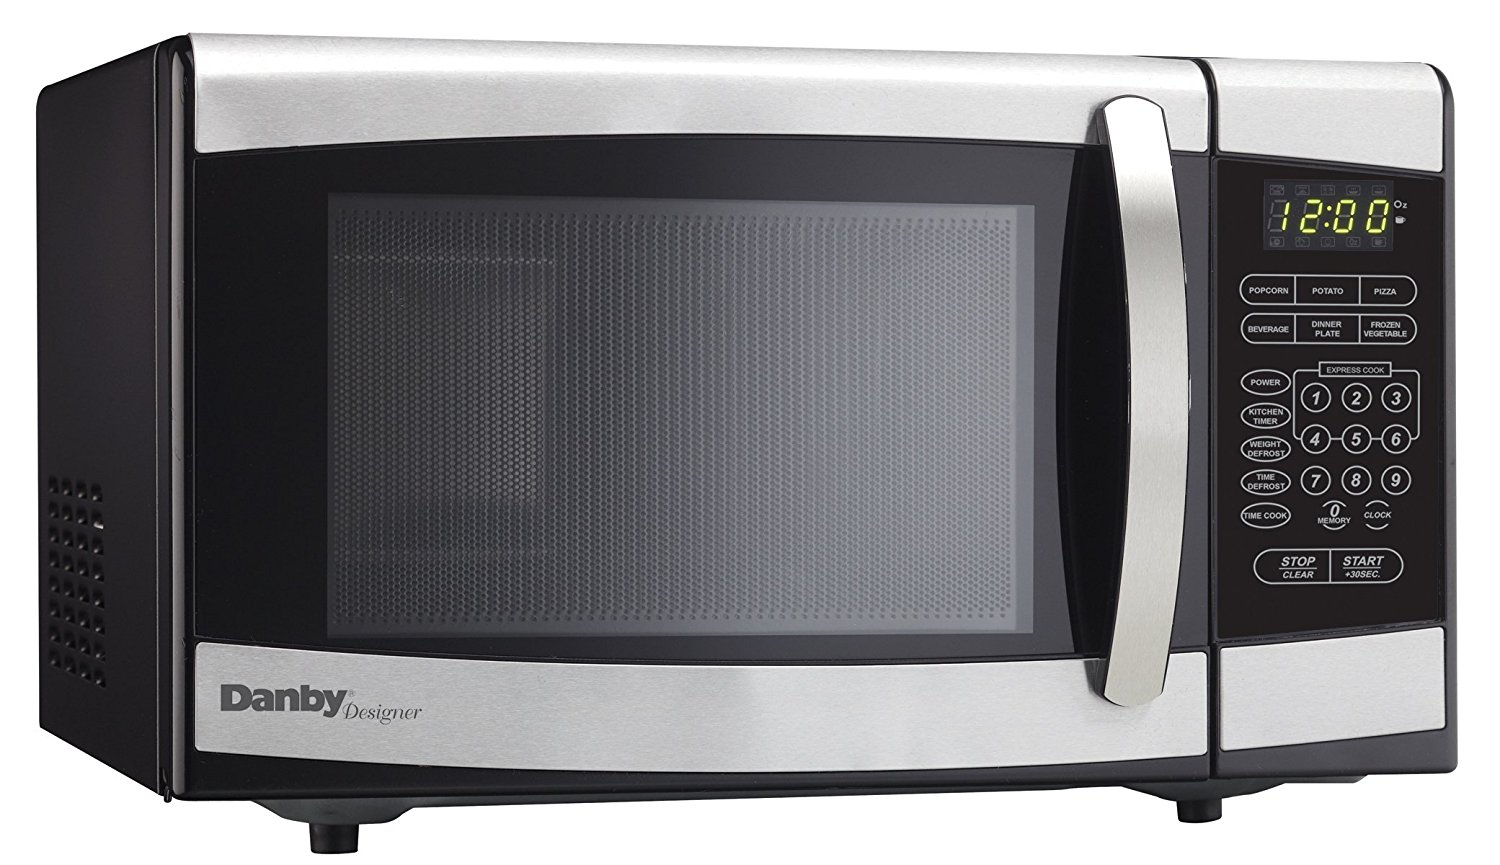 Danby Designer DMW077BLSDD Countertop Microwave, 0.7 cu.ft., Black and Stainless Steel